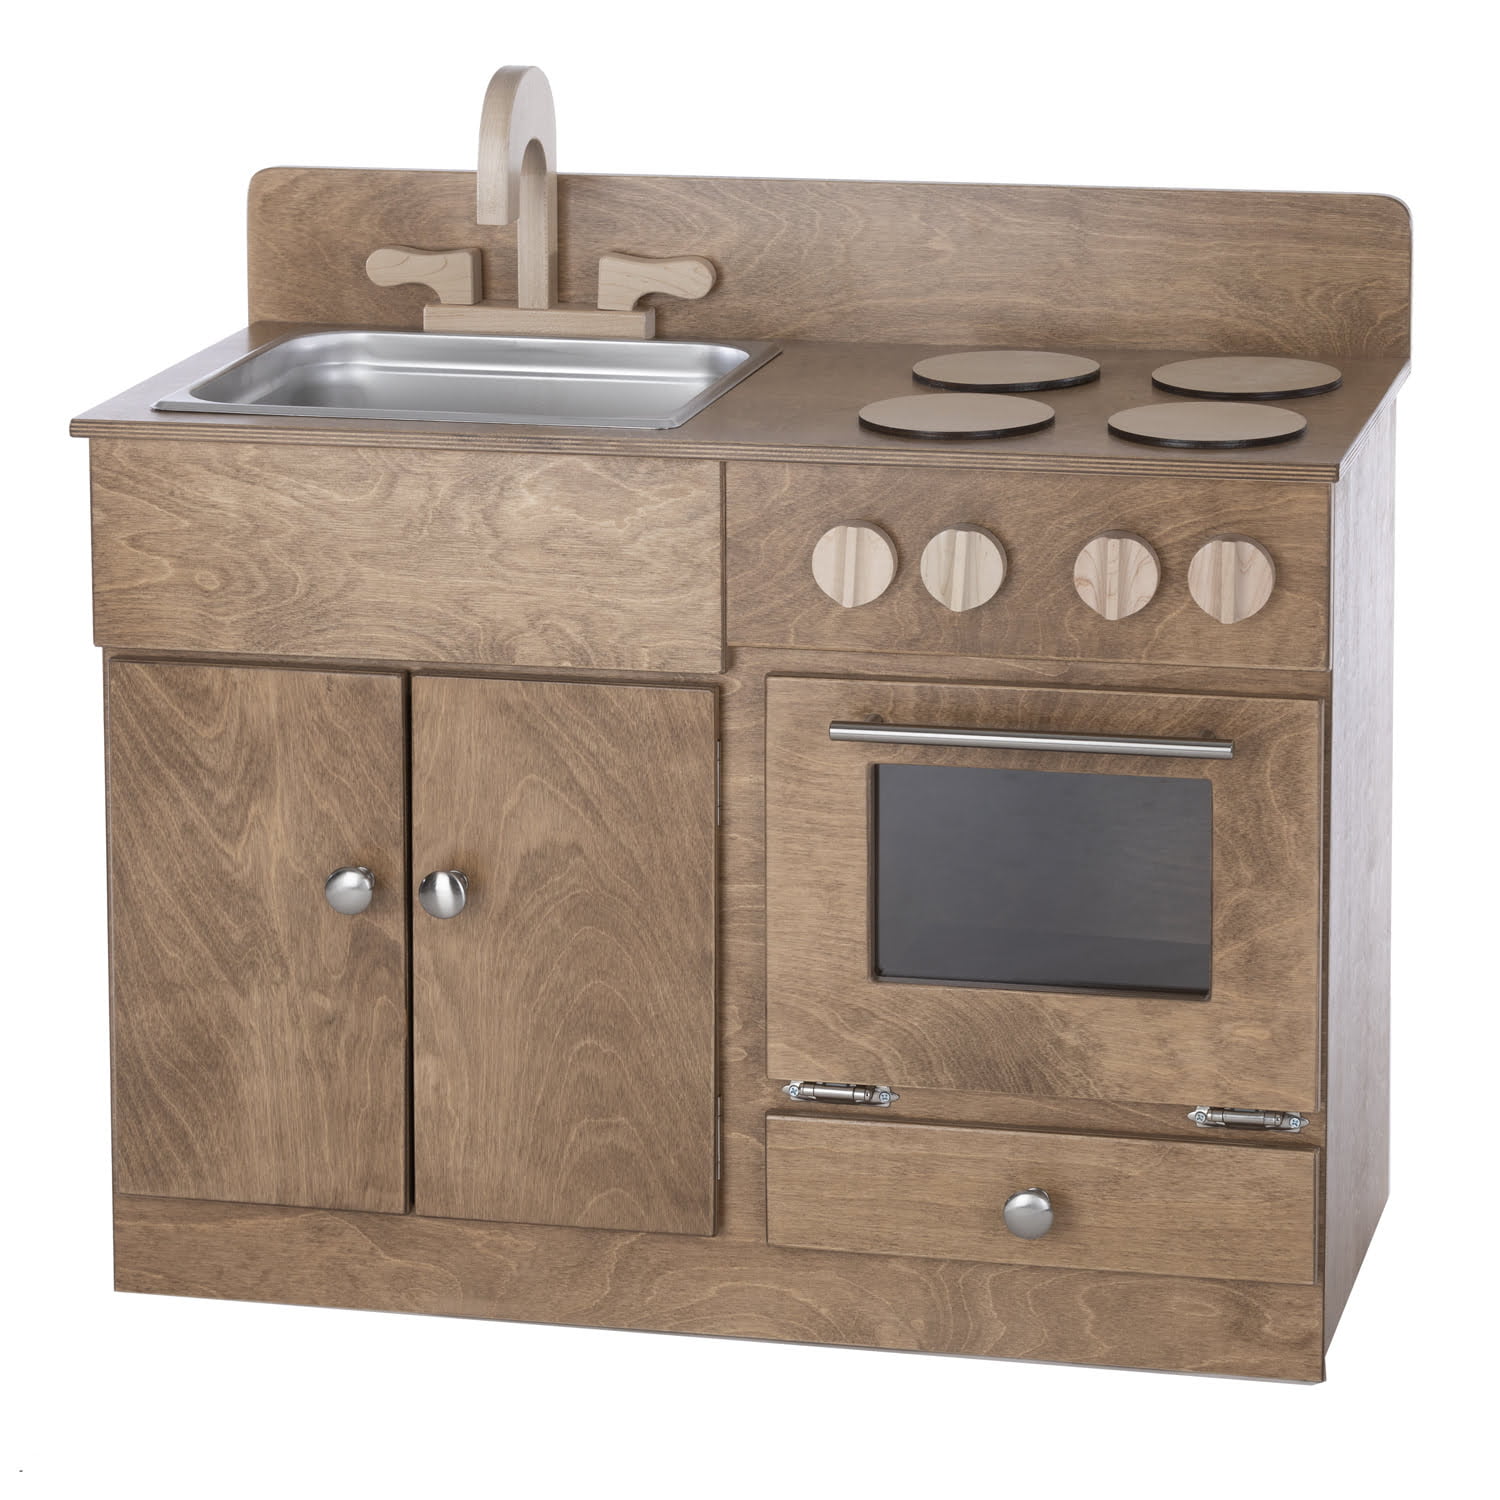 Child’s Play Kitchen Sink/Stove Combo